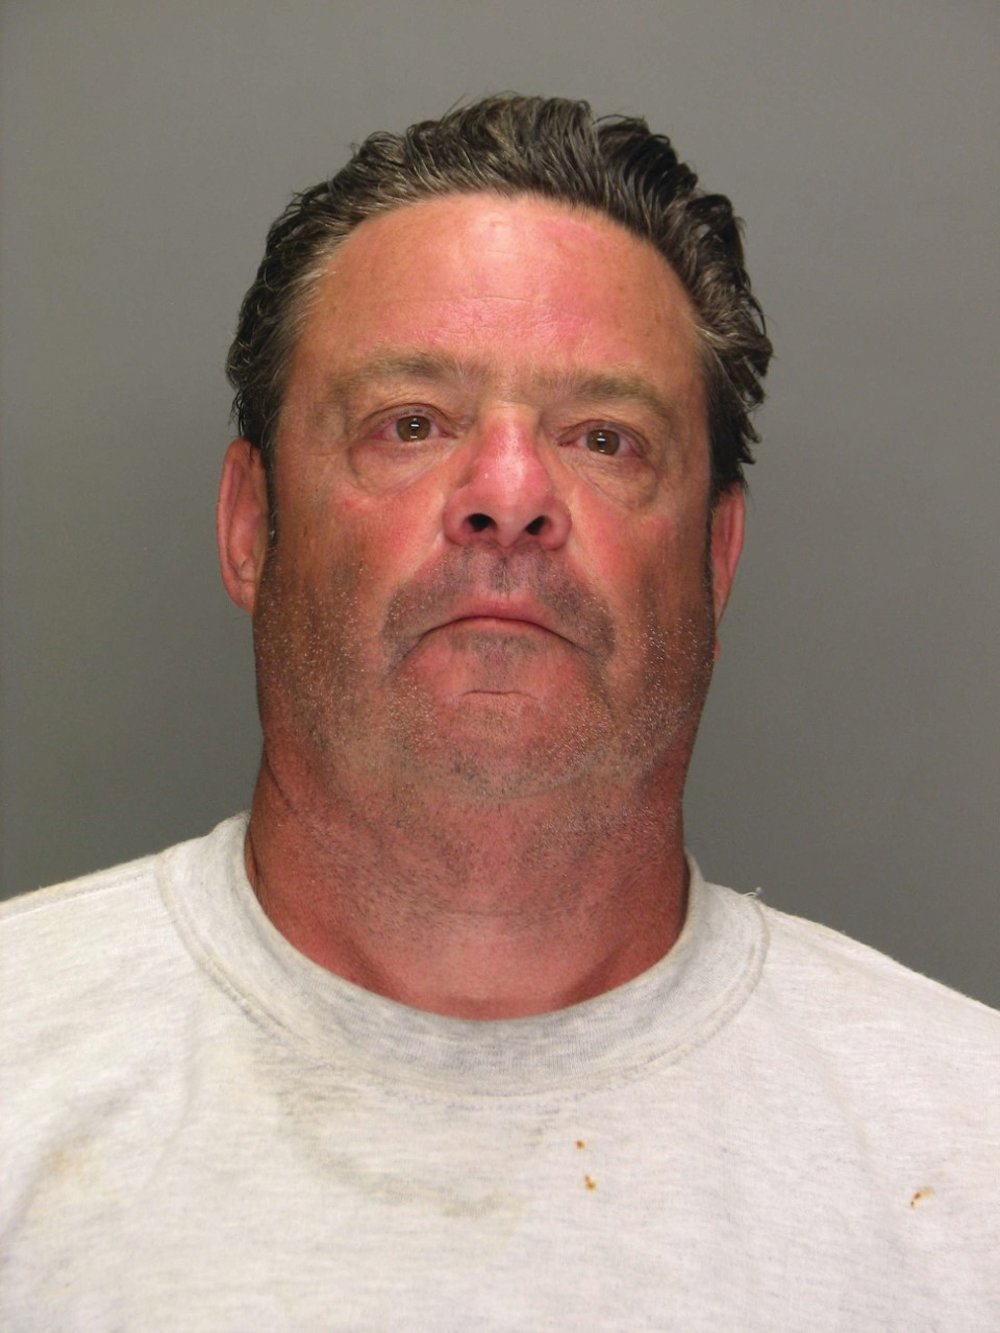 CHARGED: Warwick Police announced the arrest of alleged bank robber Paul Edward Larson, 60, of East Greenwich. Larson has been charged in connection to the May 10 Harbor One Bank robbery at 3830 Post Road in Warwick.